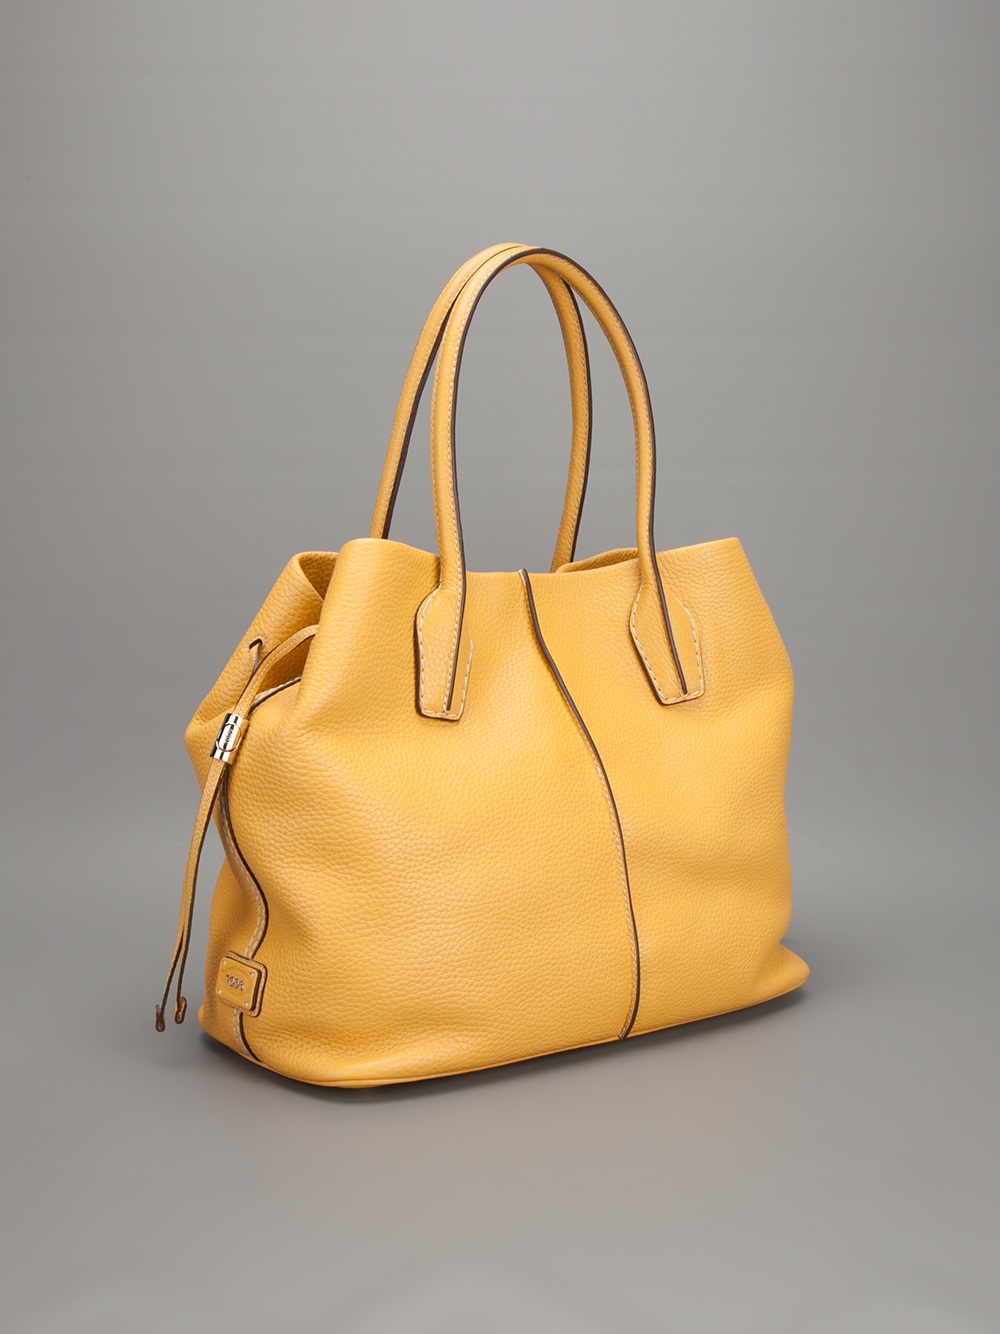 Tod's Tote Bag in Yellow - Lyst